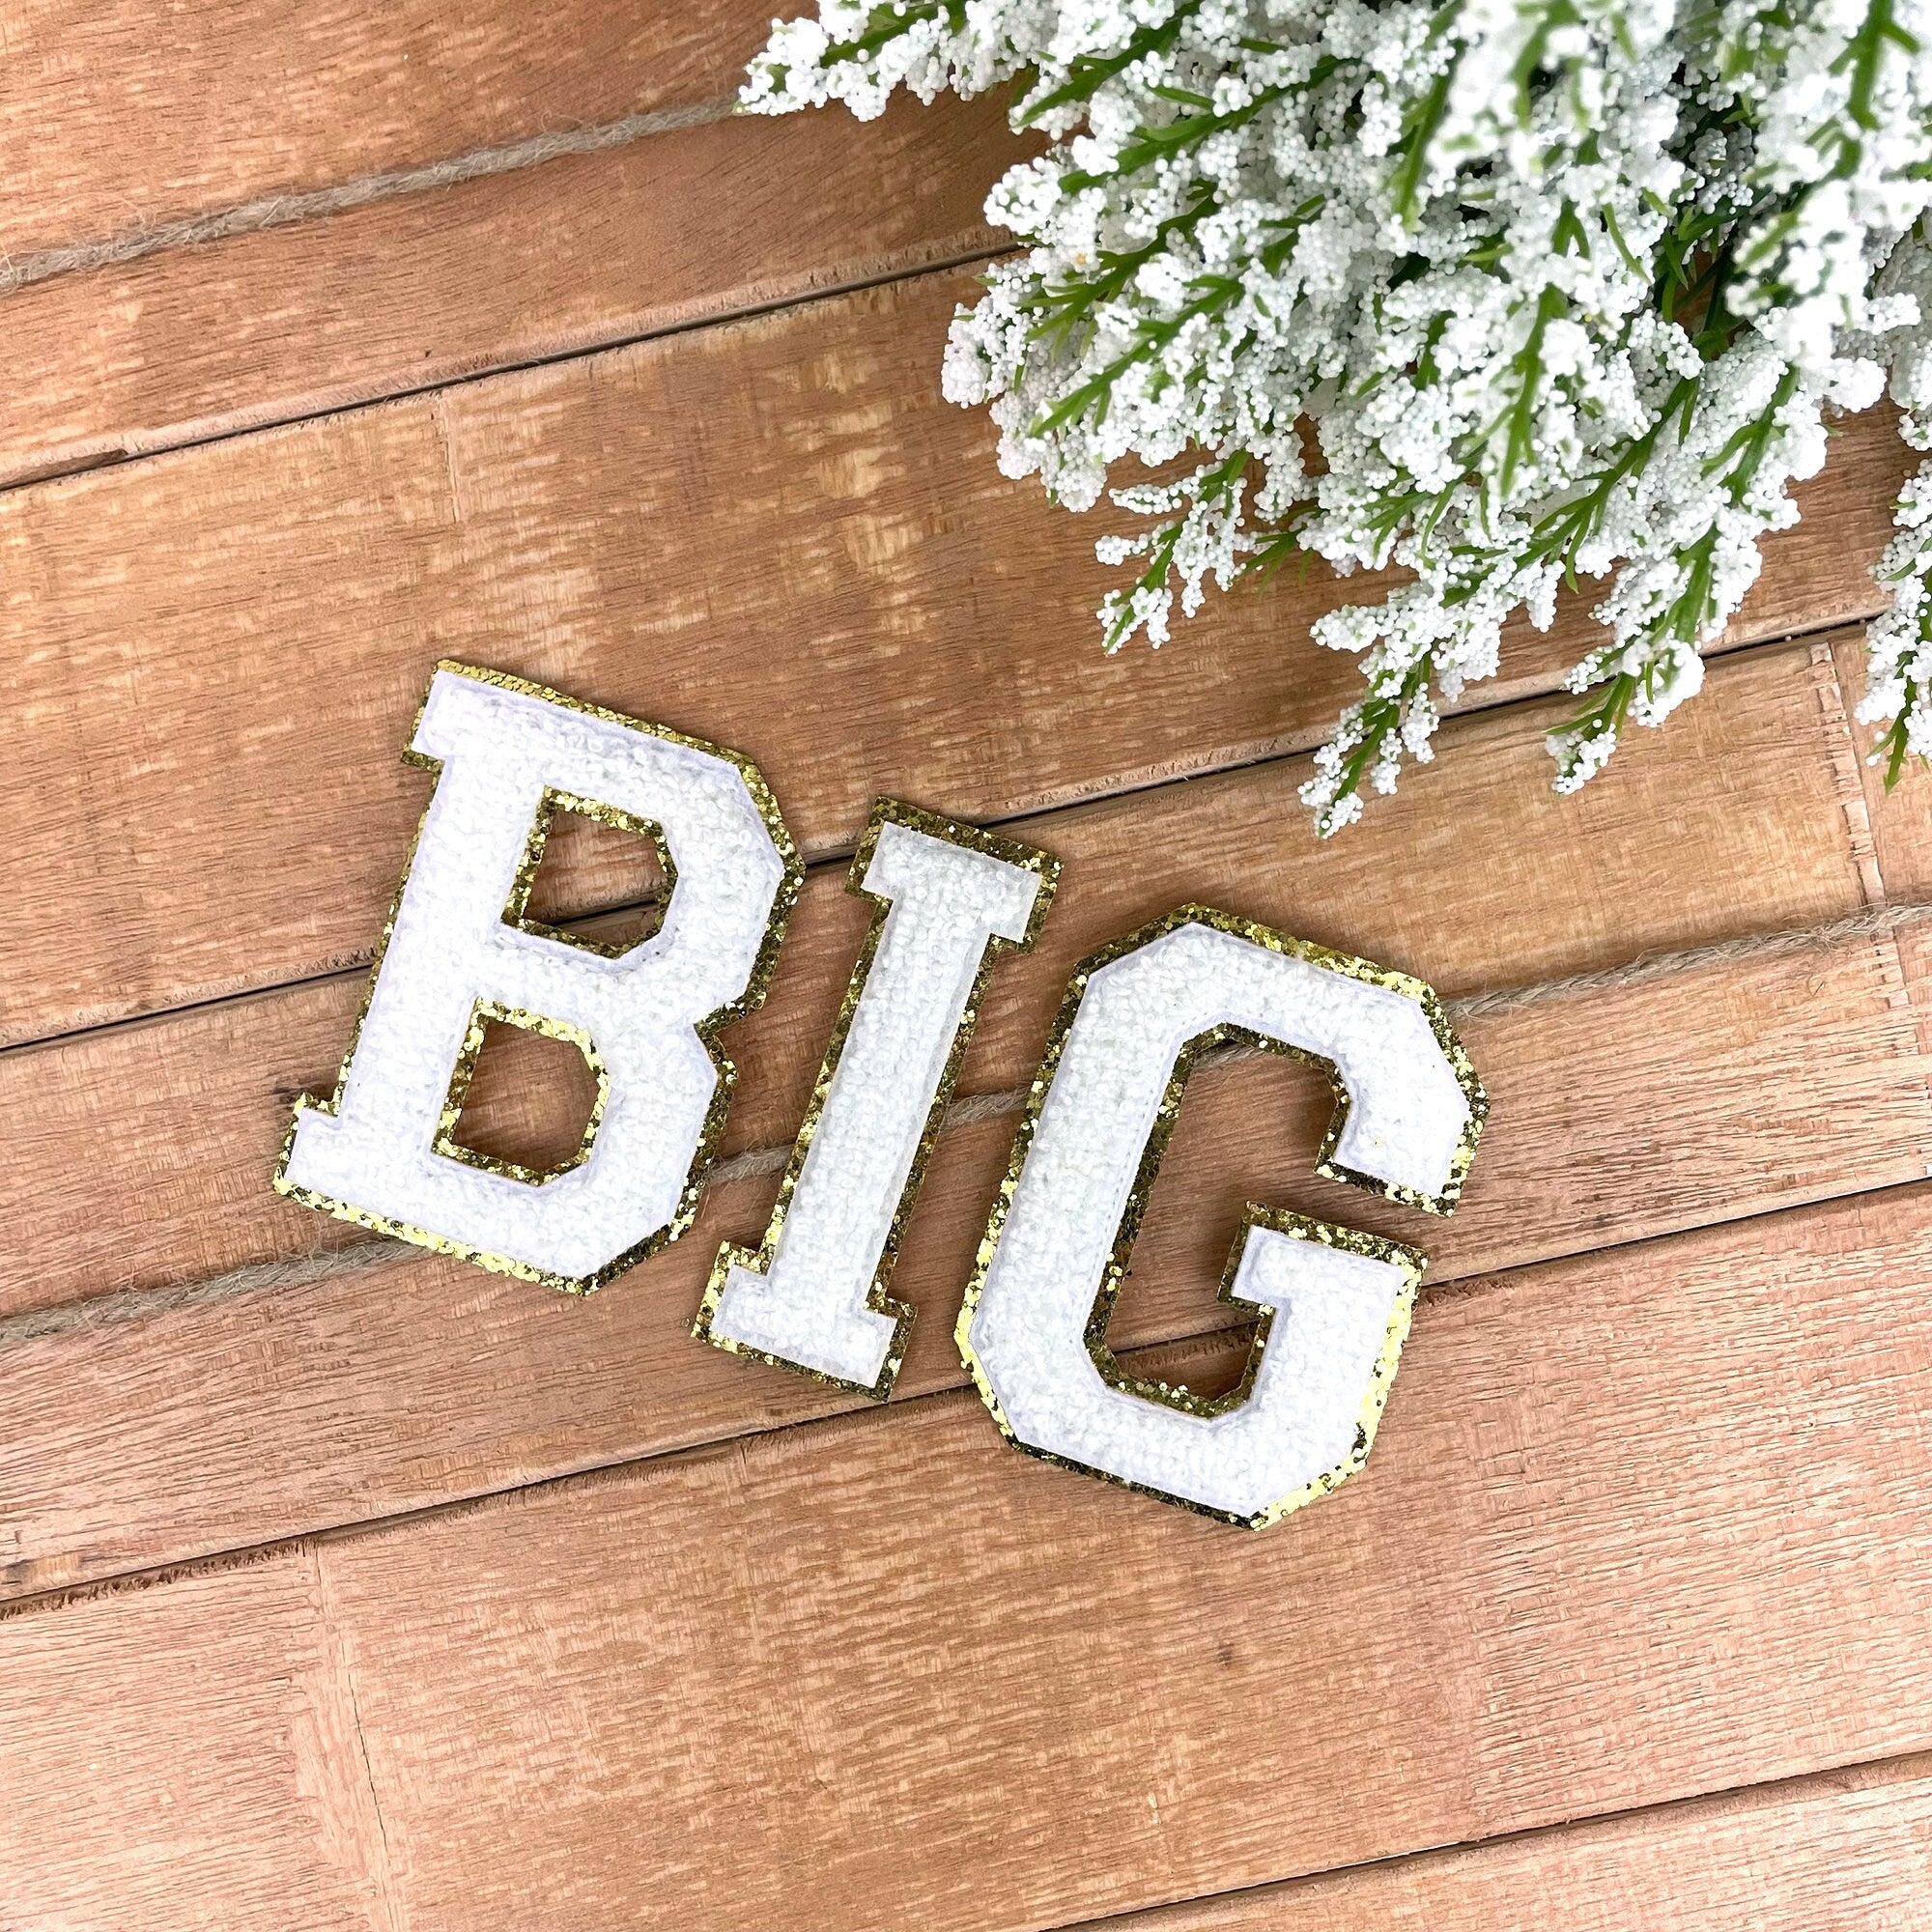 Big & Little Iron-On Varsity Greek Letter Patch Set, Chenille Patches, Gold Glitter Trim, DIY Project